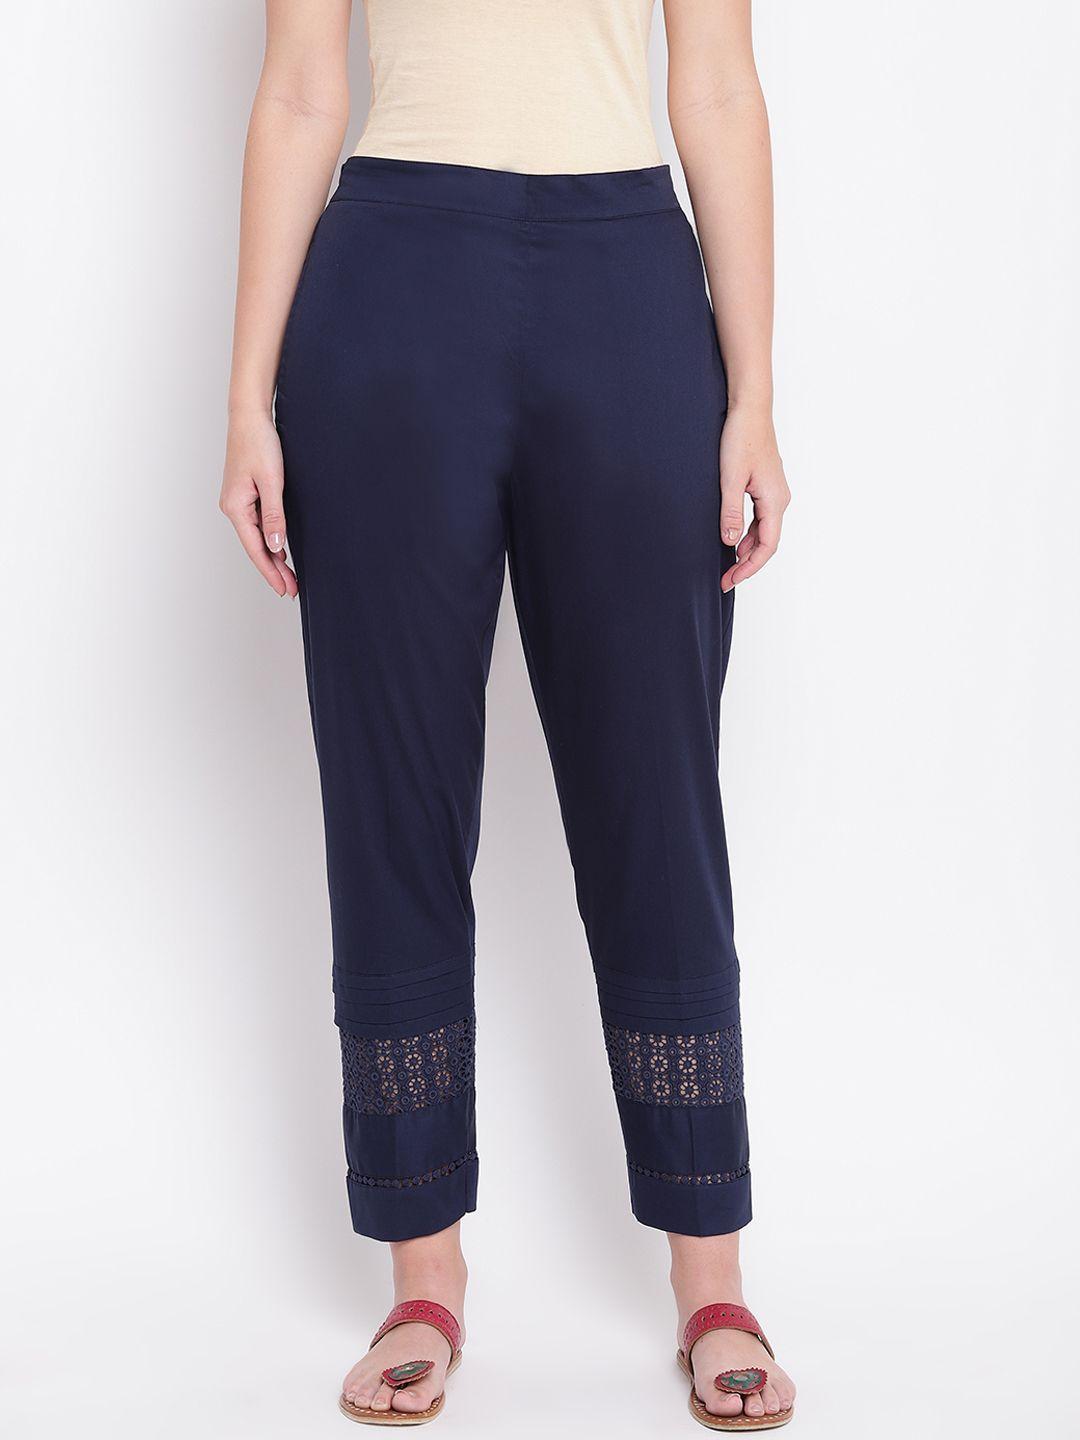 rivi women navy blue relaxed fit solid regular trousers with lace inserts